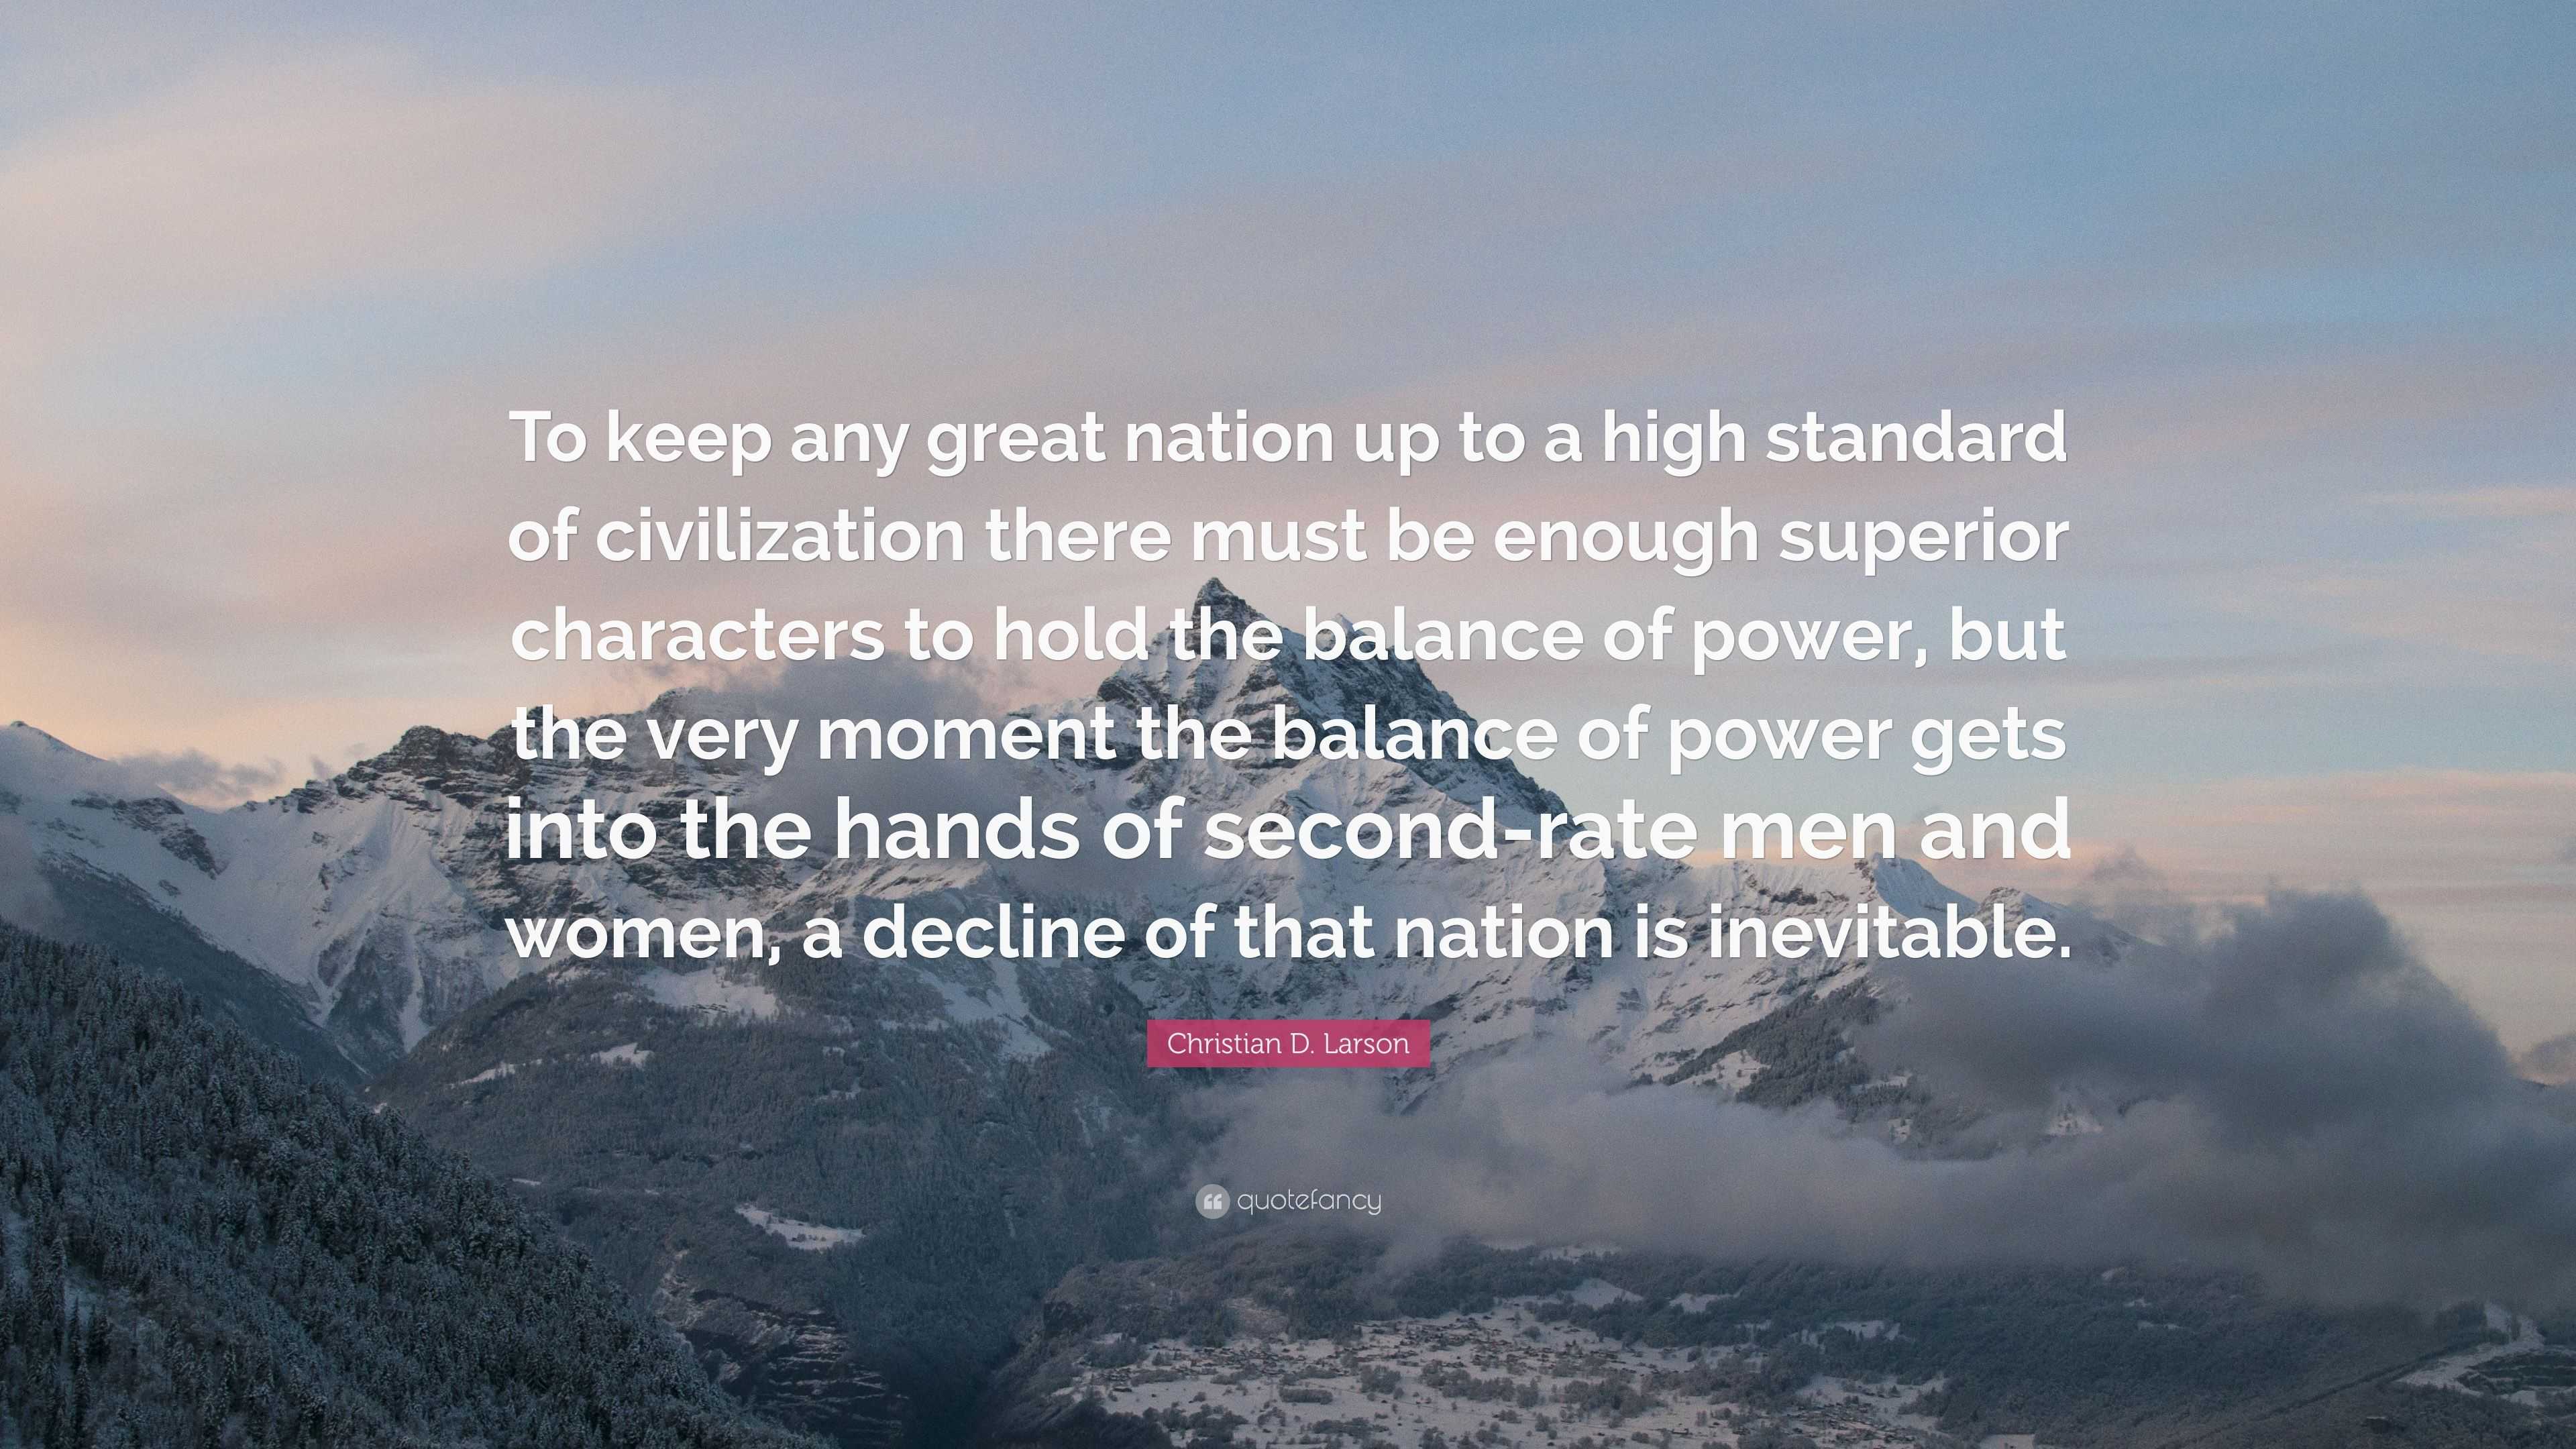 Christian D. Larson Quote: “To keep any great nation up to a high standard  of civilization there must be enough superior characters to hold the  bala...”